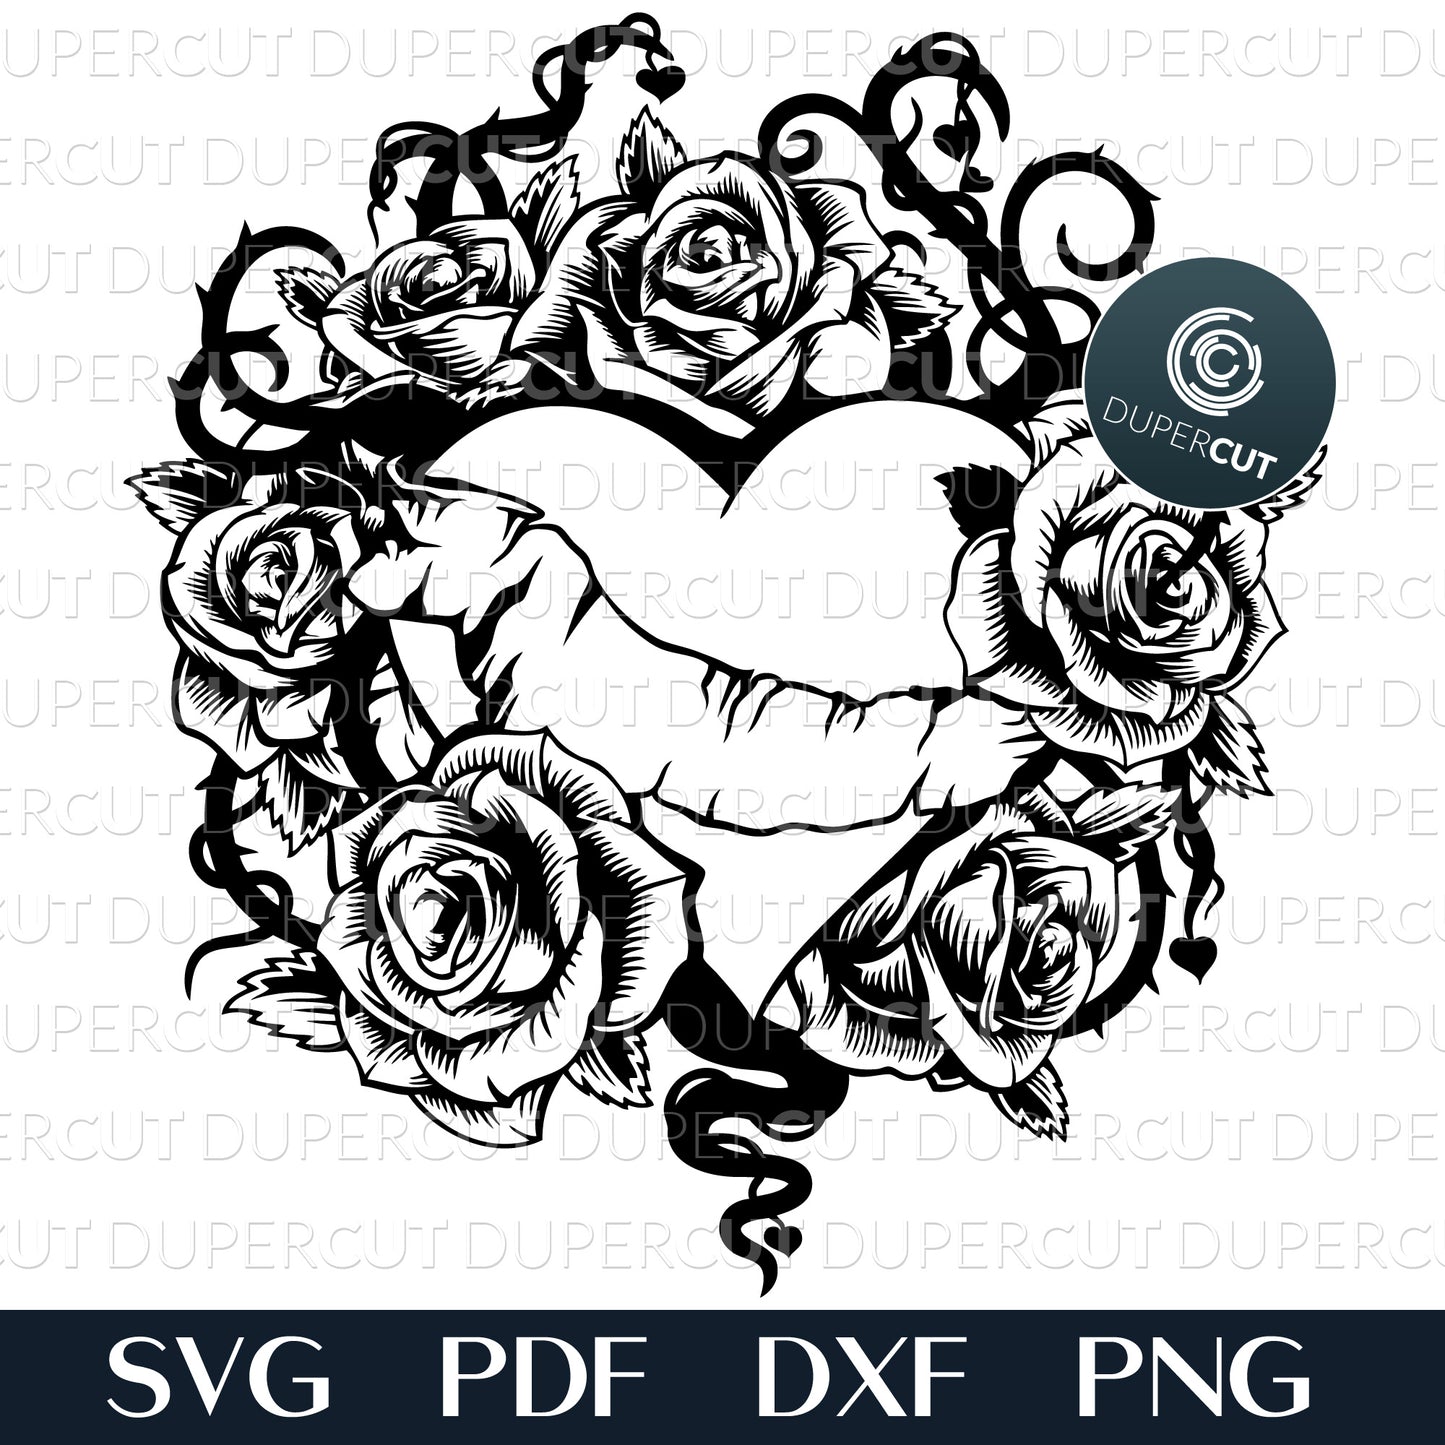 Valentines day design, mother's day heart and roses tattoo. Papercutting template for commercial use. SVG files for Silhouette Cameo, Cricut, Glowforge, DXF for CNC, laser cutting, print on demand